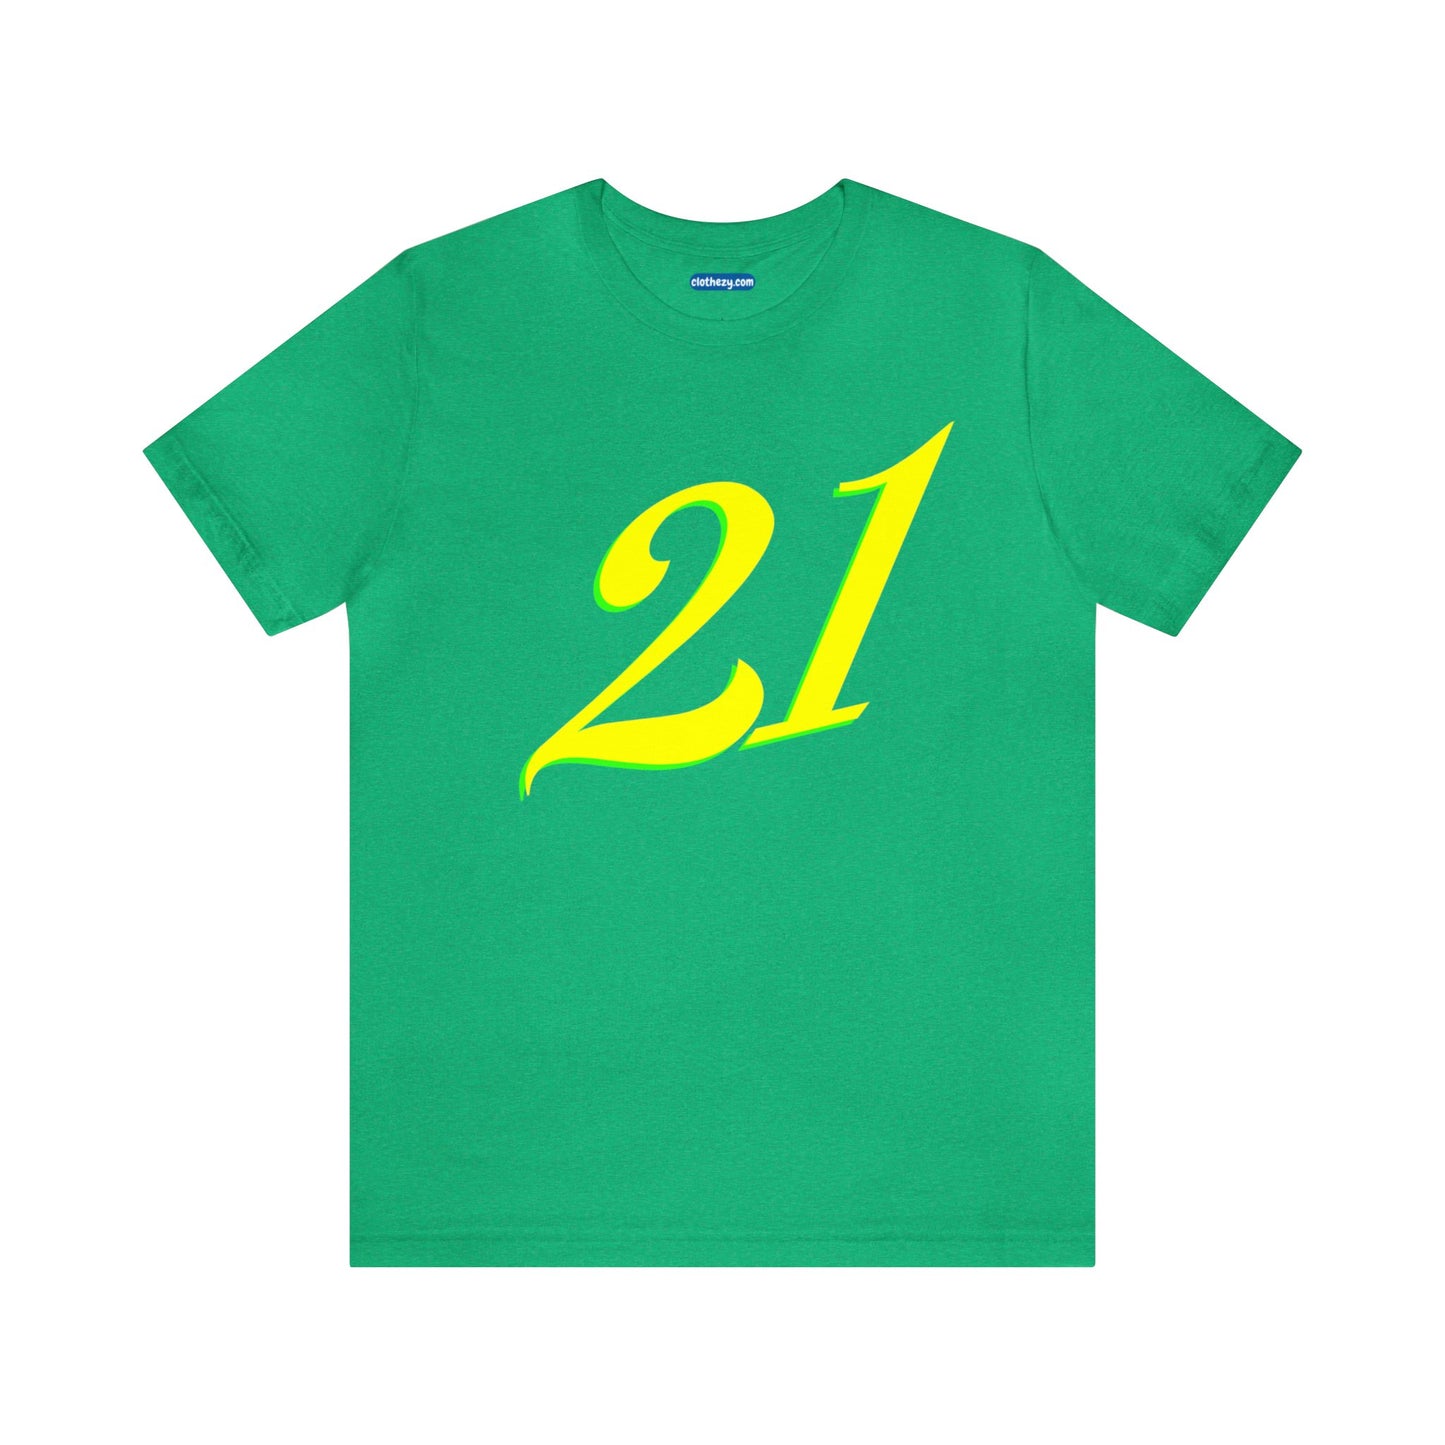 Number 21 Design - Soft Cotton Tee for birthdays and celebrations, Gift for friends and family, Multiple Options by clothezy.com in Royal Blue Heather Size Small - Buy Now